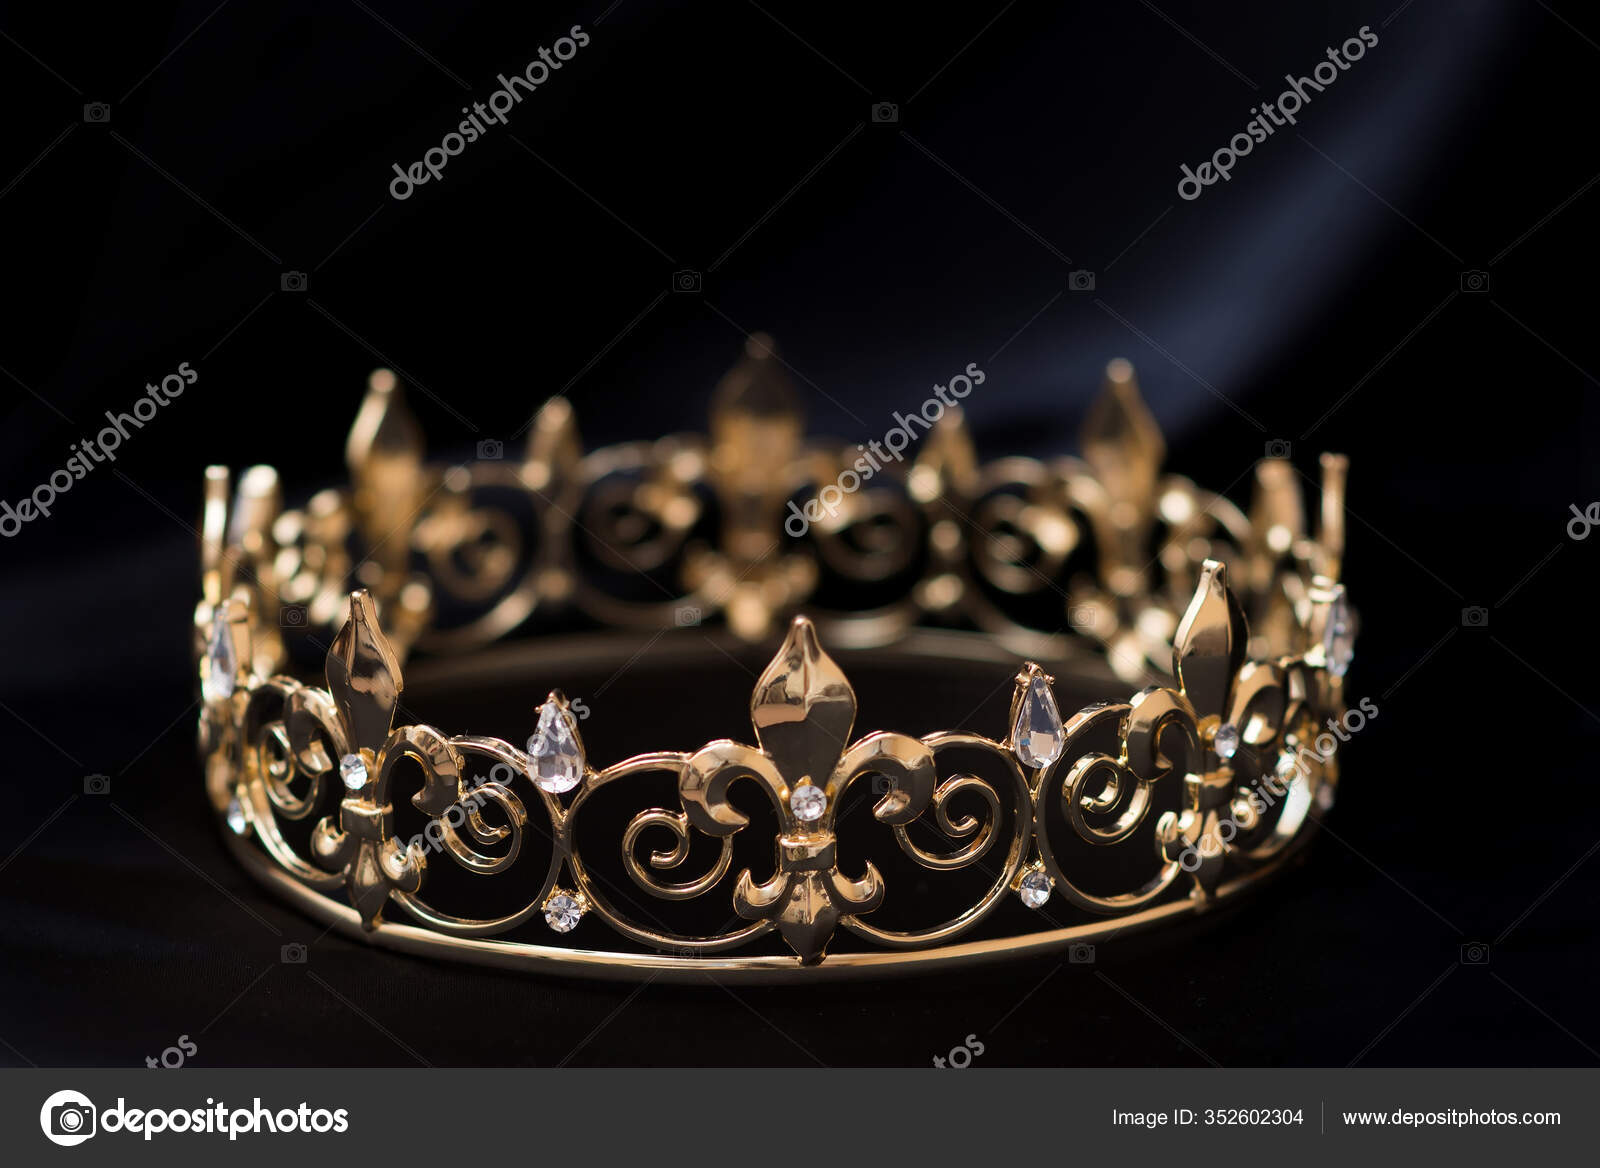 Crown black background Stock Photos, Royalty Free Crown black background  Images | Depositphotos